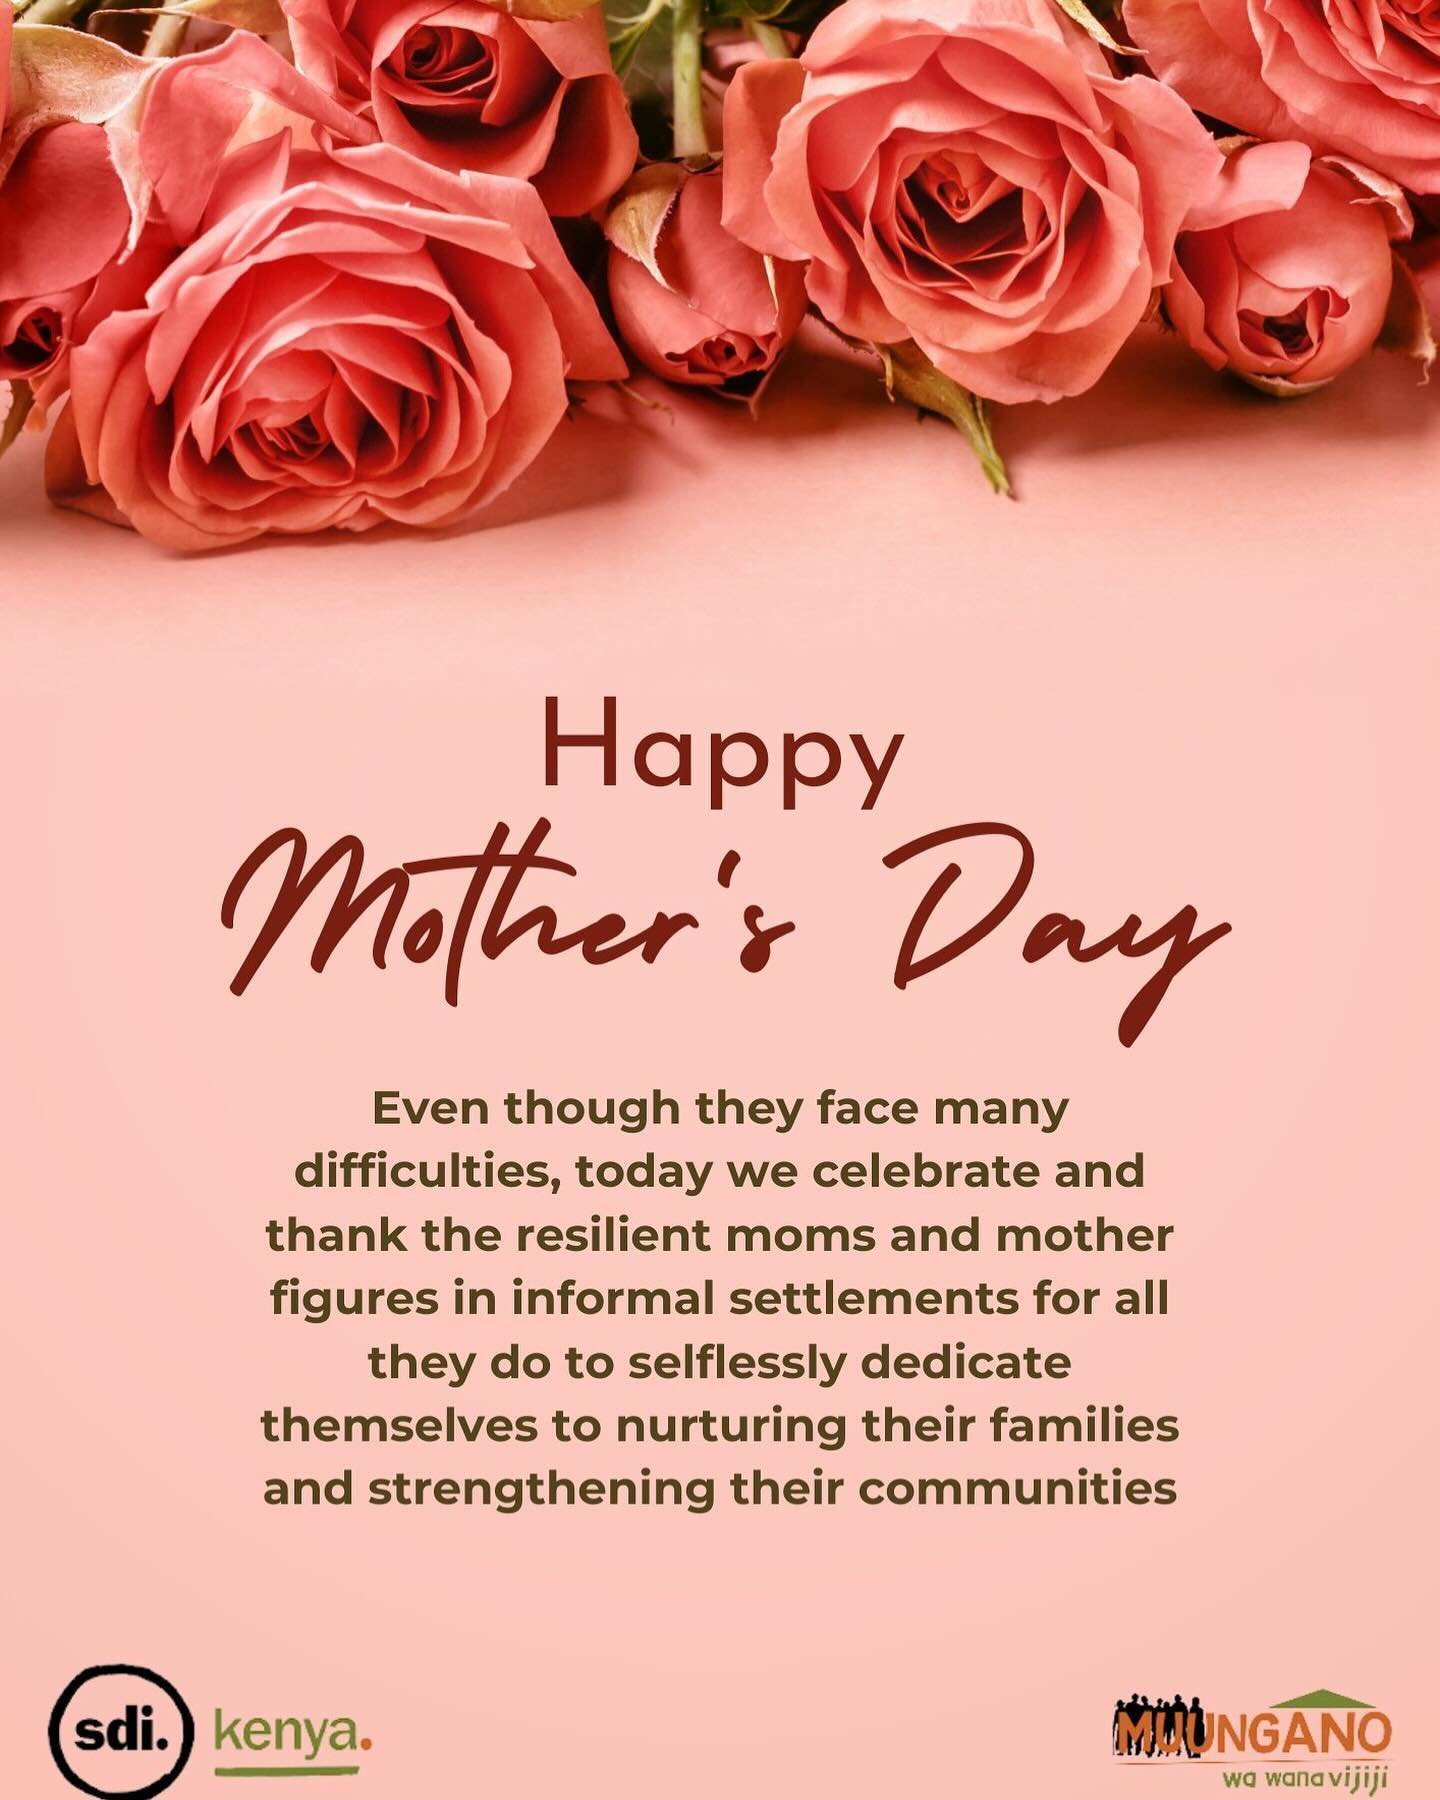 Even though they face many difficulties, today we celebrate and thank the resilient moms and mother figures in informal settlements for all they do to selflessly dedicate themselves to nurturing their families and strengthening their communities

#Mo